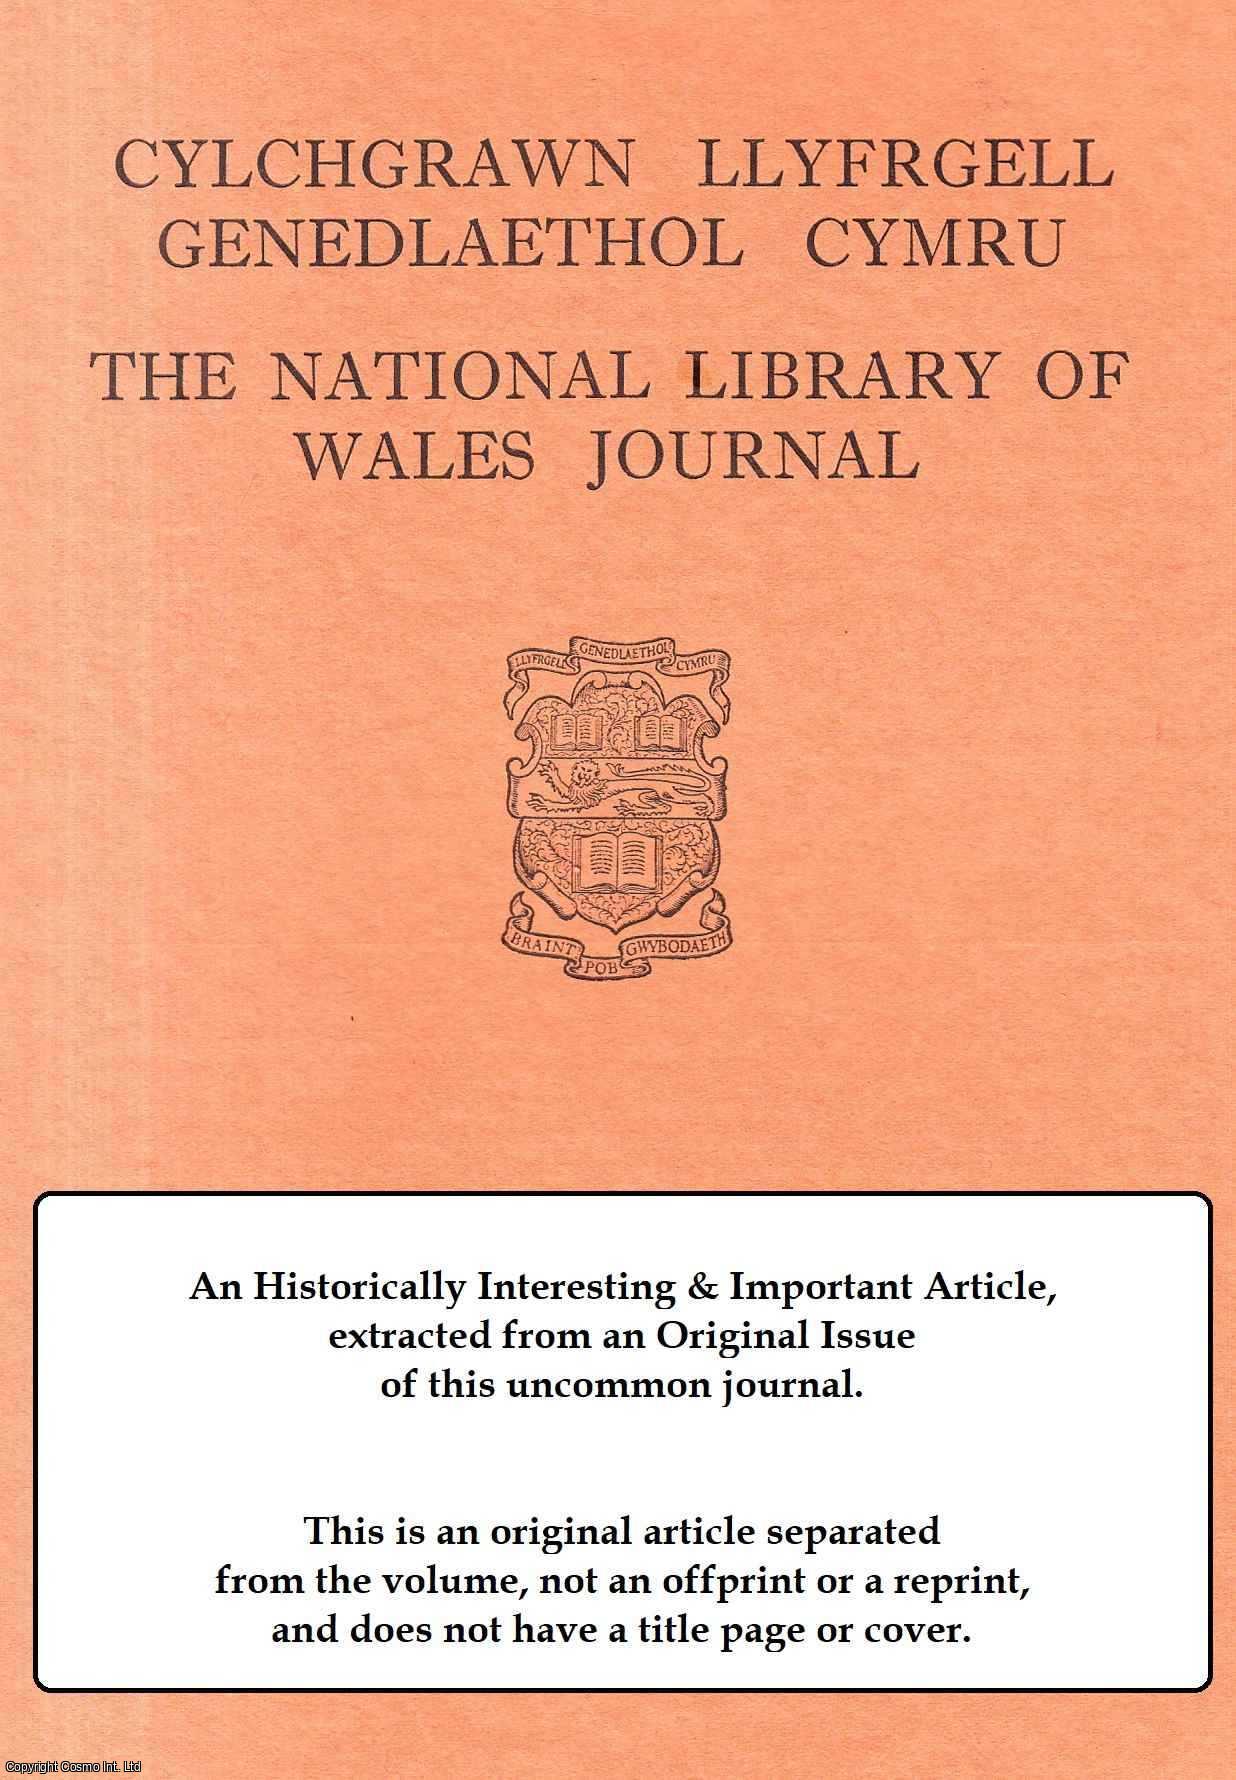 Elisabeth Inglis-Jones - A Pembrokeshire County Family in The Eighteenth Century - Part III. An original article from The National Library of Wales Journal, 1972.